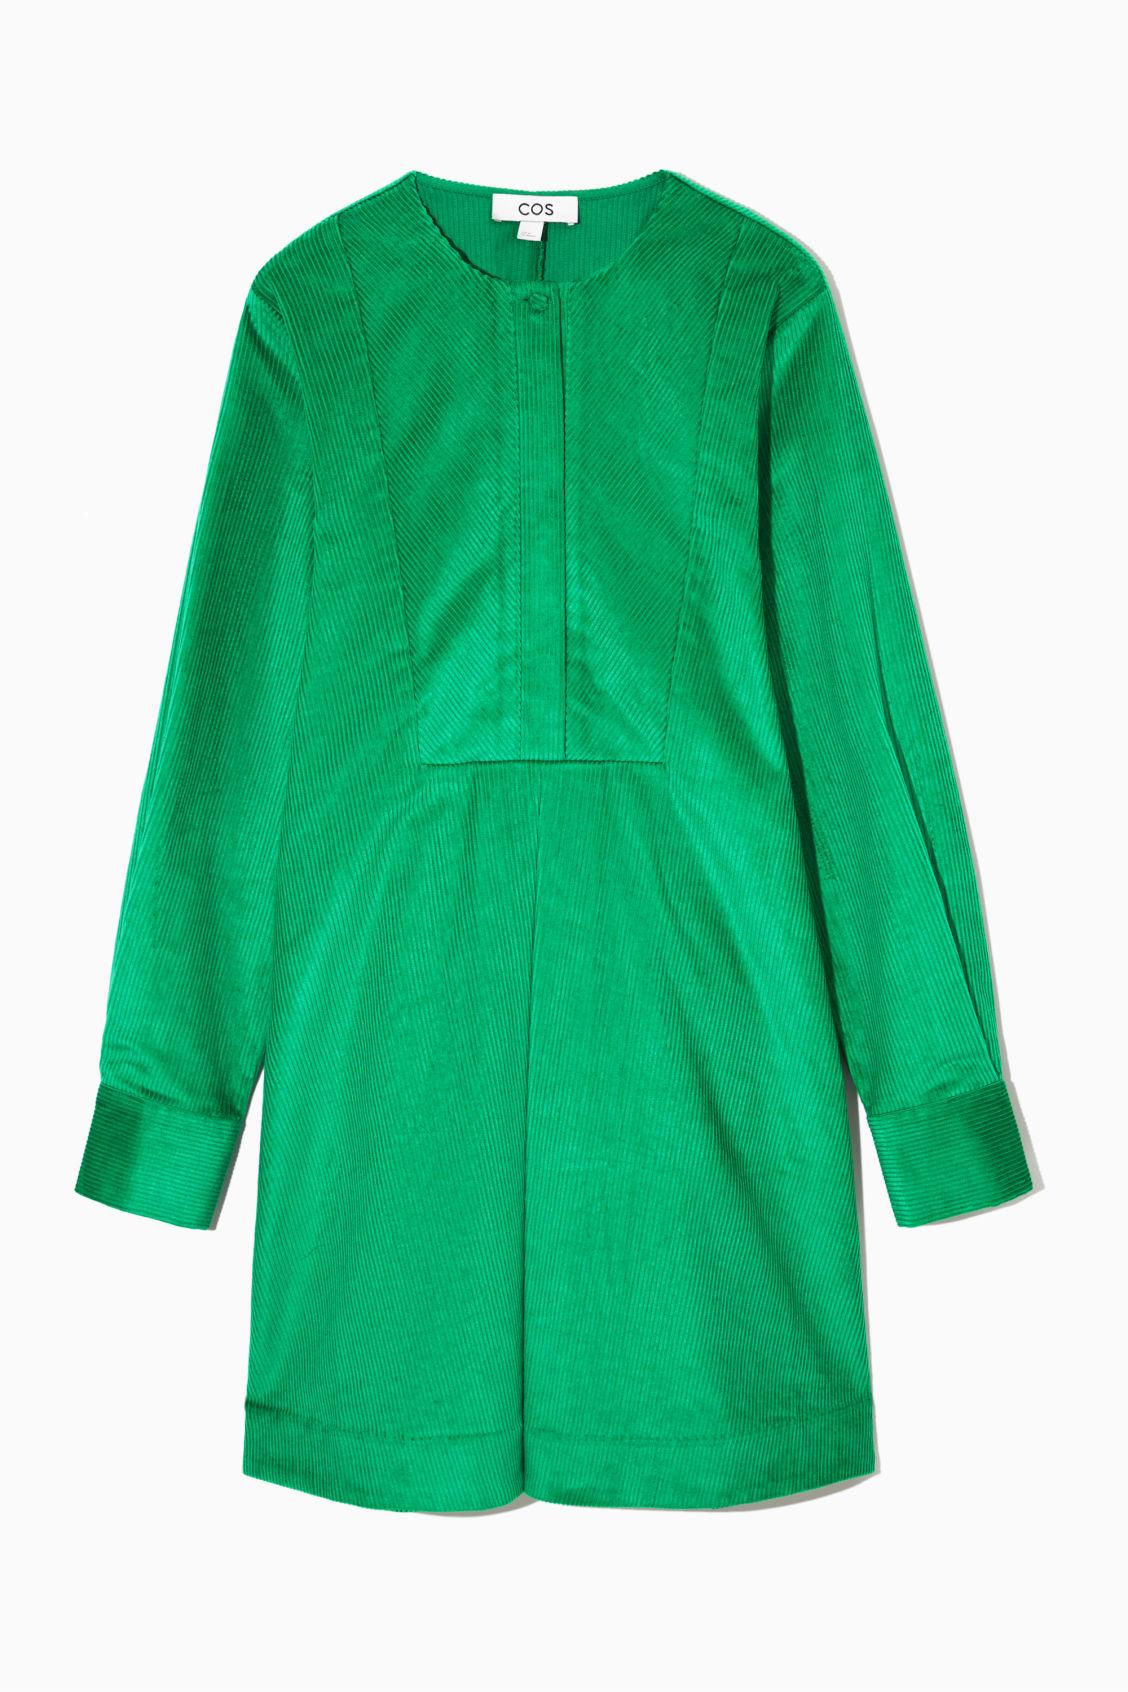 COS A-line Corduroy Shirt Dress in Green | Lyst